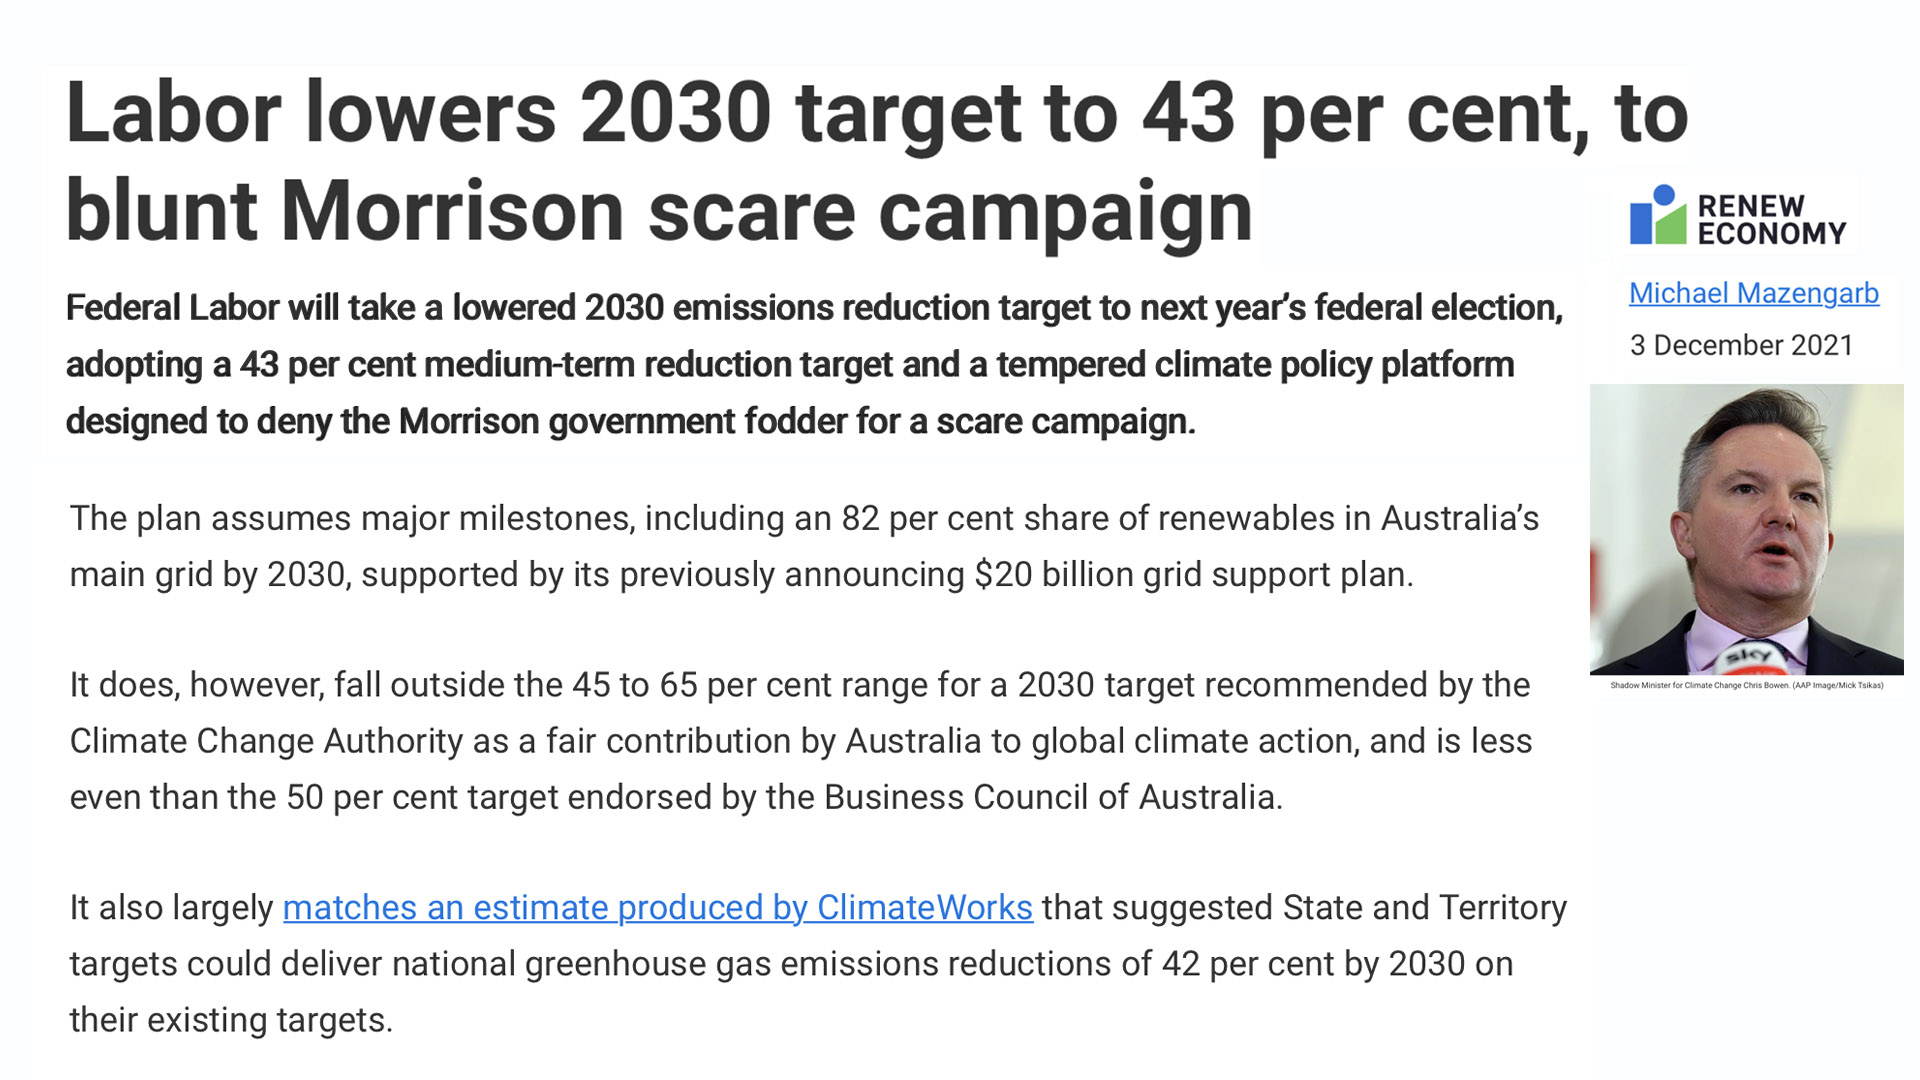 Lower ALP 43% climate target chosen by party room, just slightly above State and Territory projected policy contributions